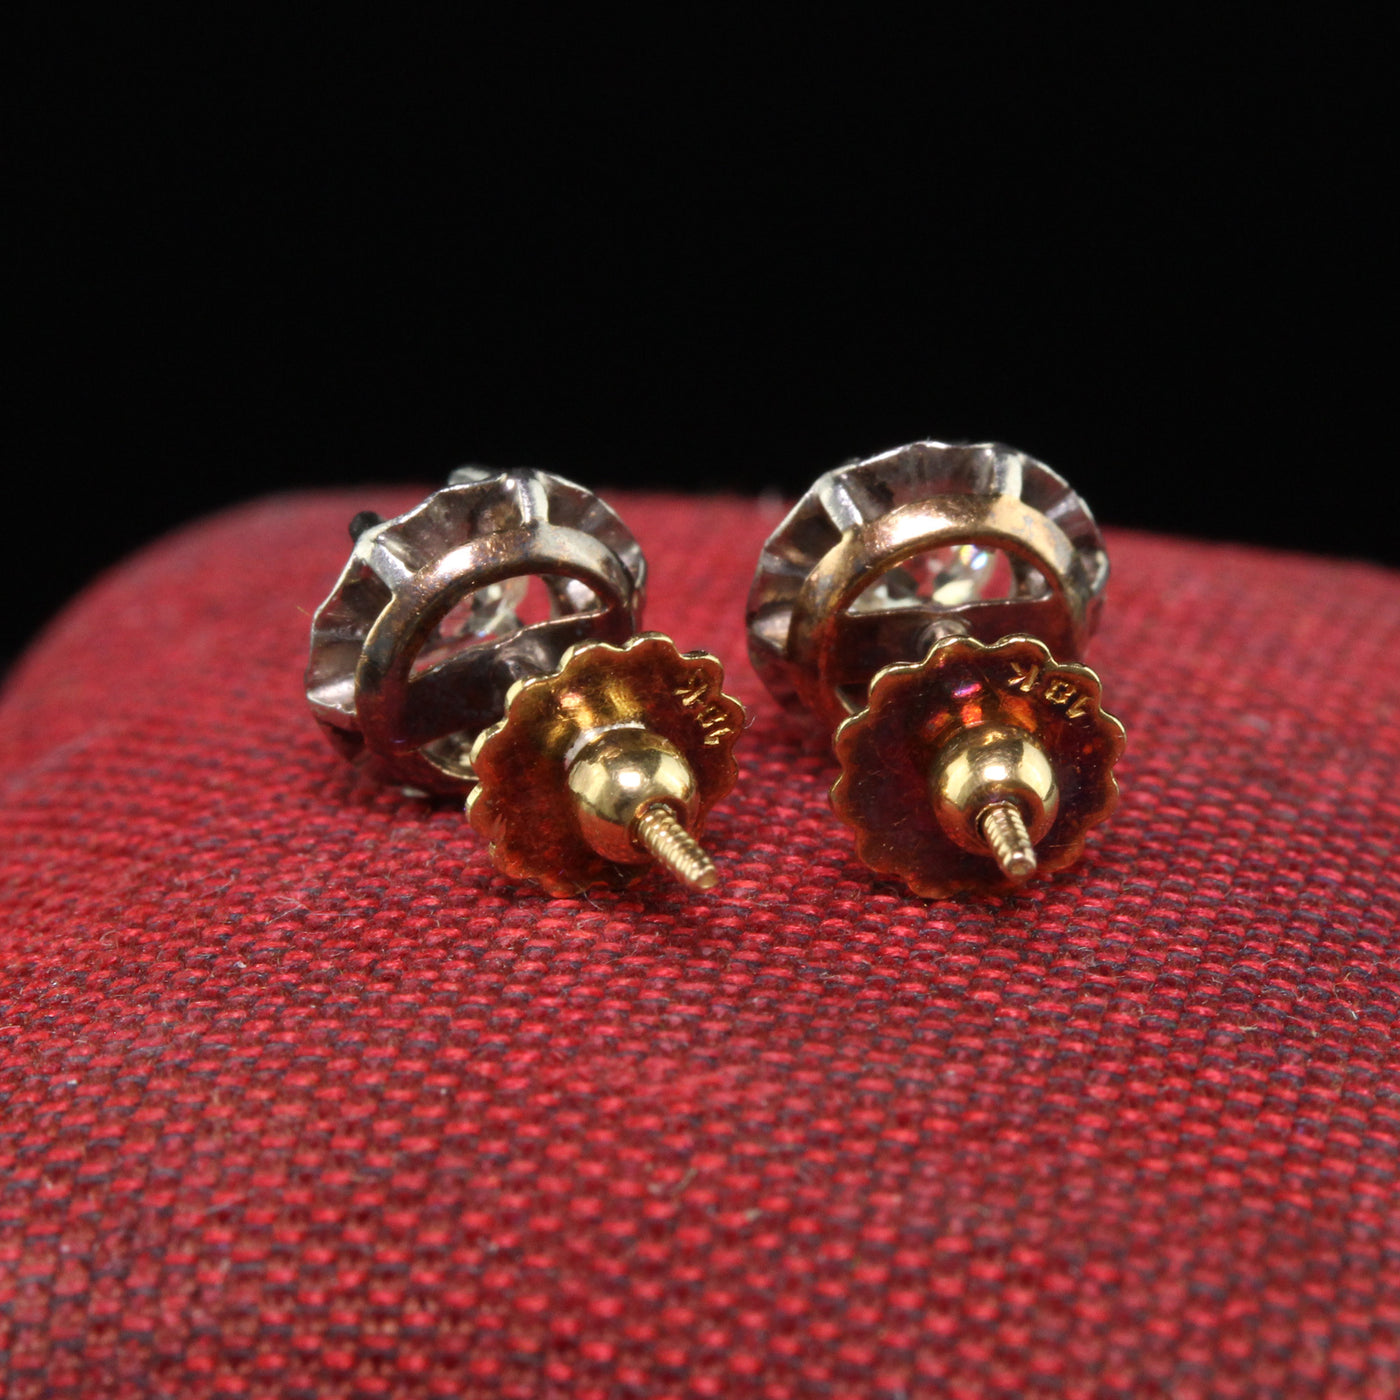 Antique Edwardian 18K Yellow Gold and Platinum Old Mine Diamond Stud Earrings